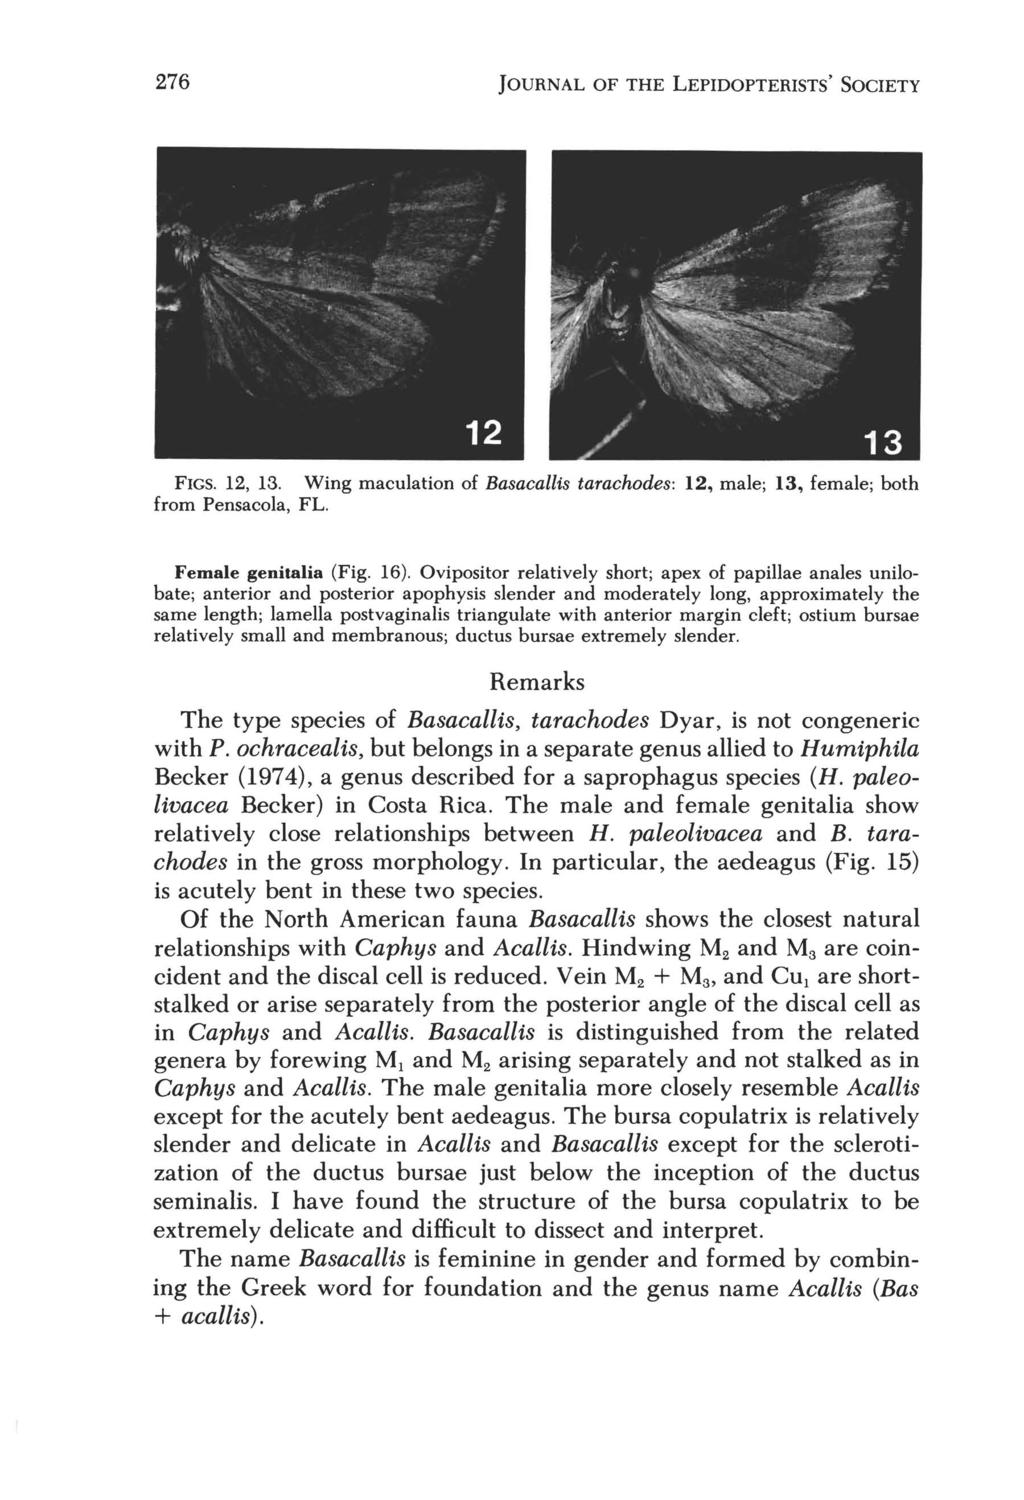 276 JOURNAL OF THE LEPIDOPTERISTS' SOCIETY FIGS. 12, 13. Wing maculation of Basacallis tarachodes: 12, male; 13, female; both from Pensacola, FL. Female genitalia (Fig. 16).